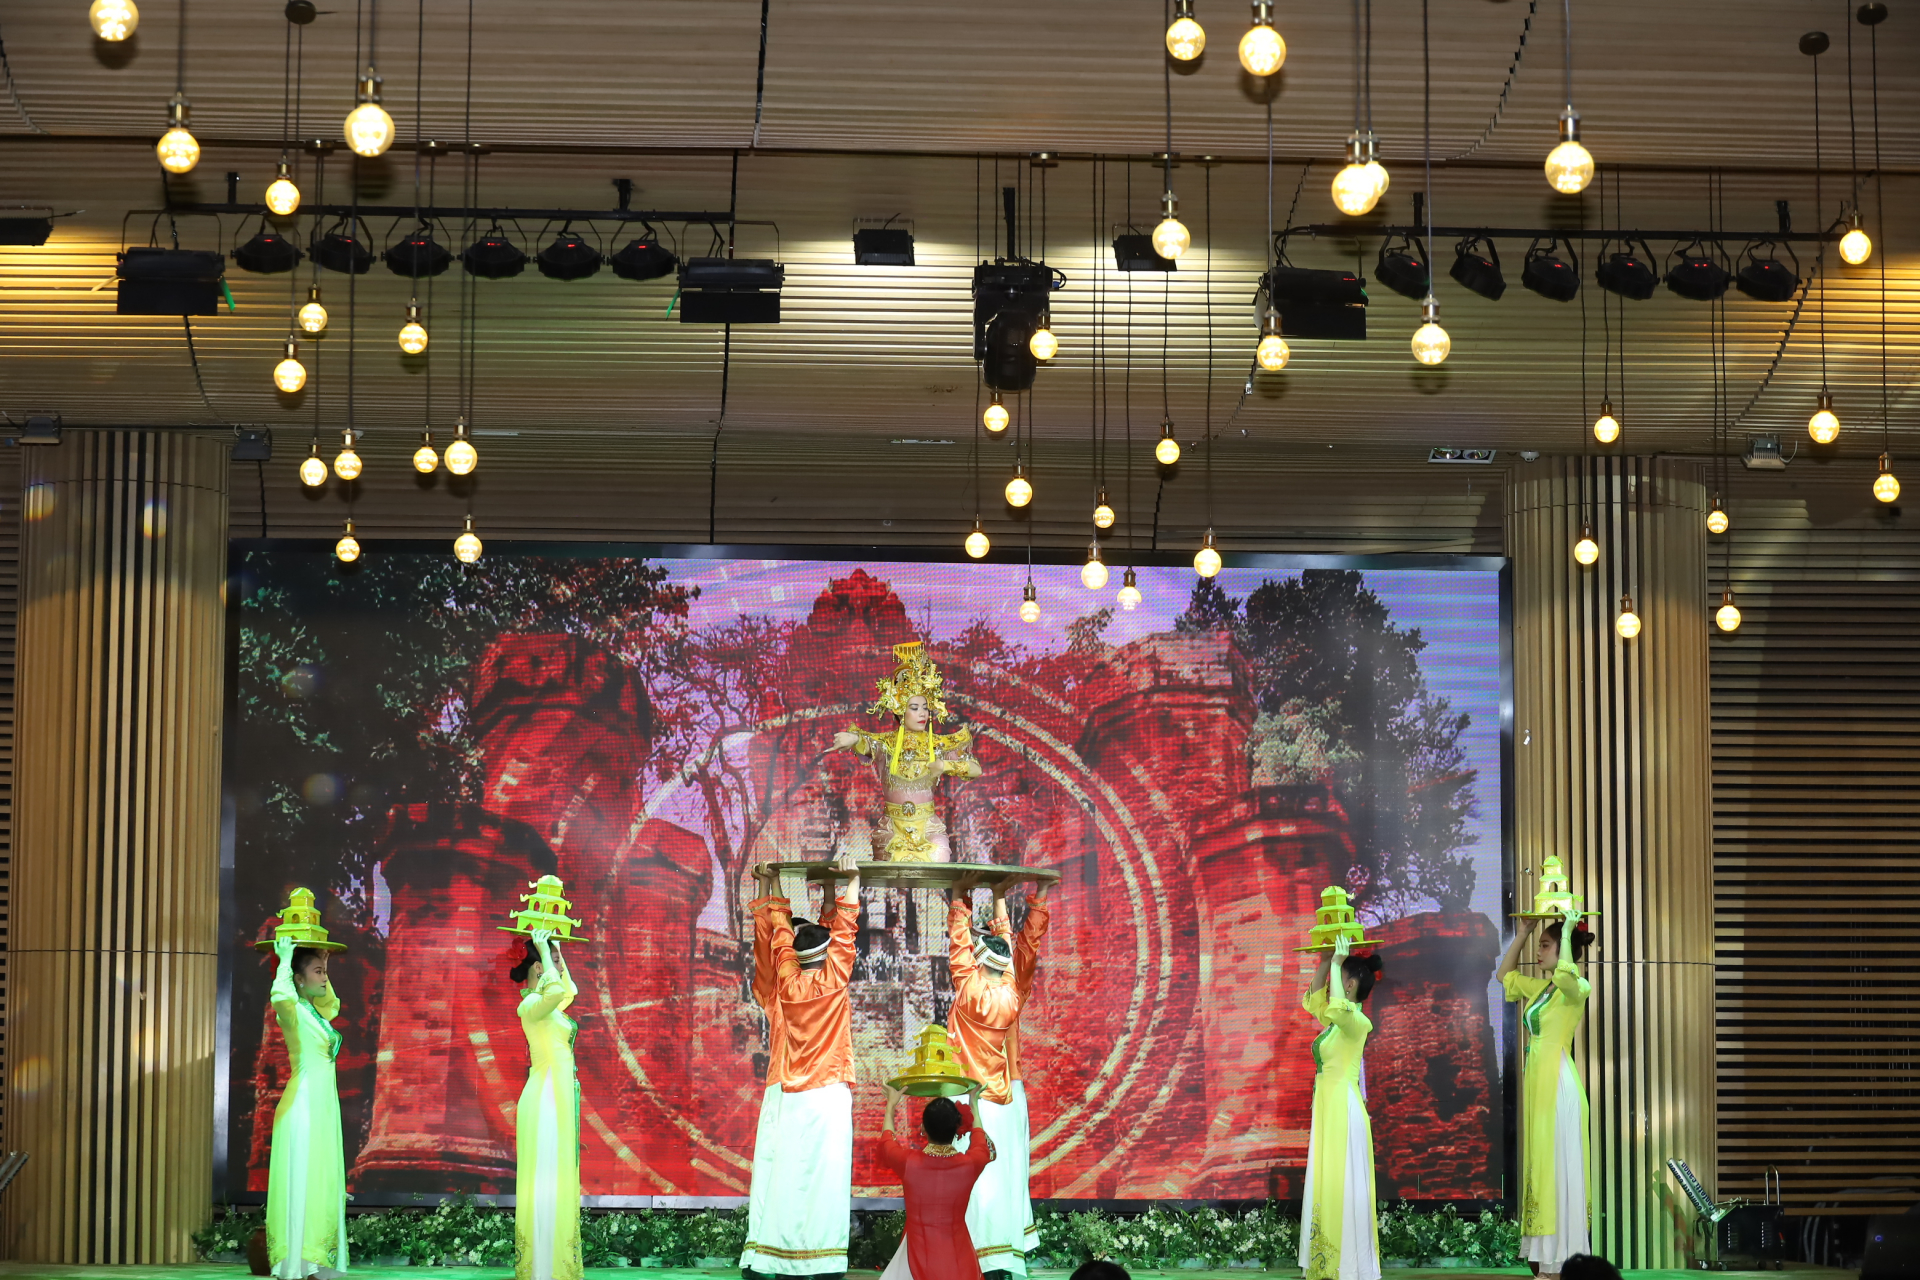 A dance performance by Hai Dang Song and Dance Troupe

